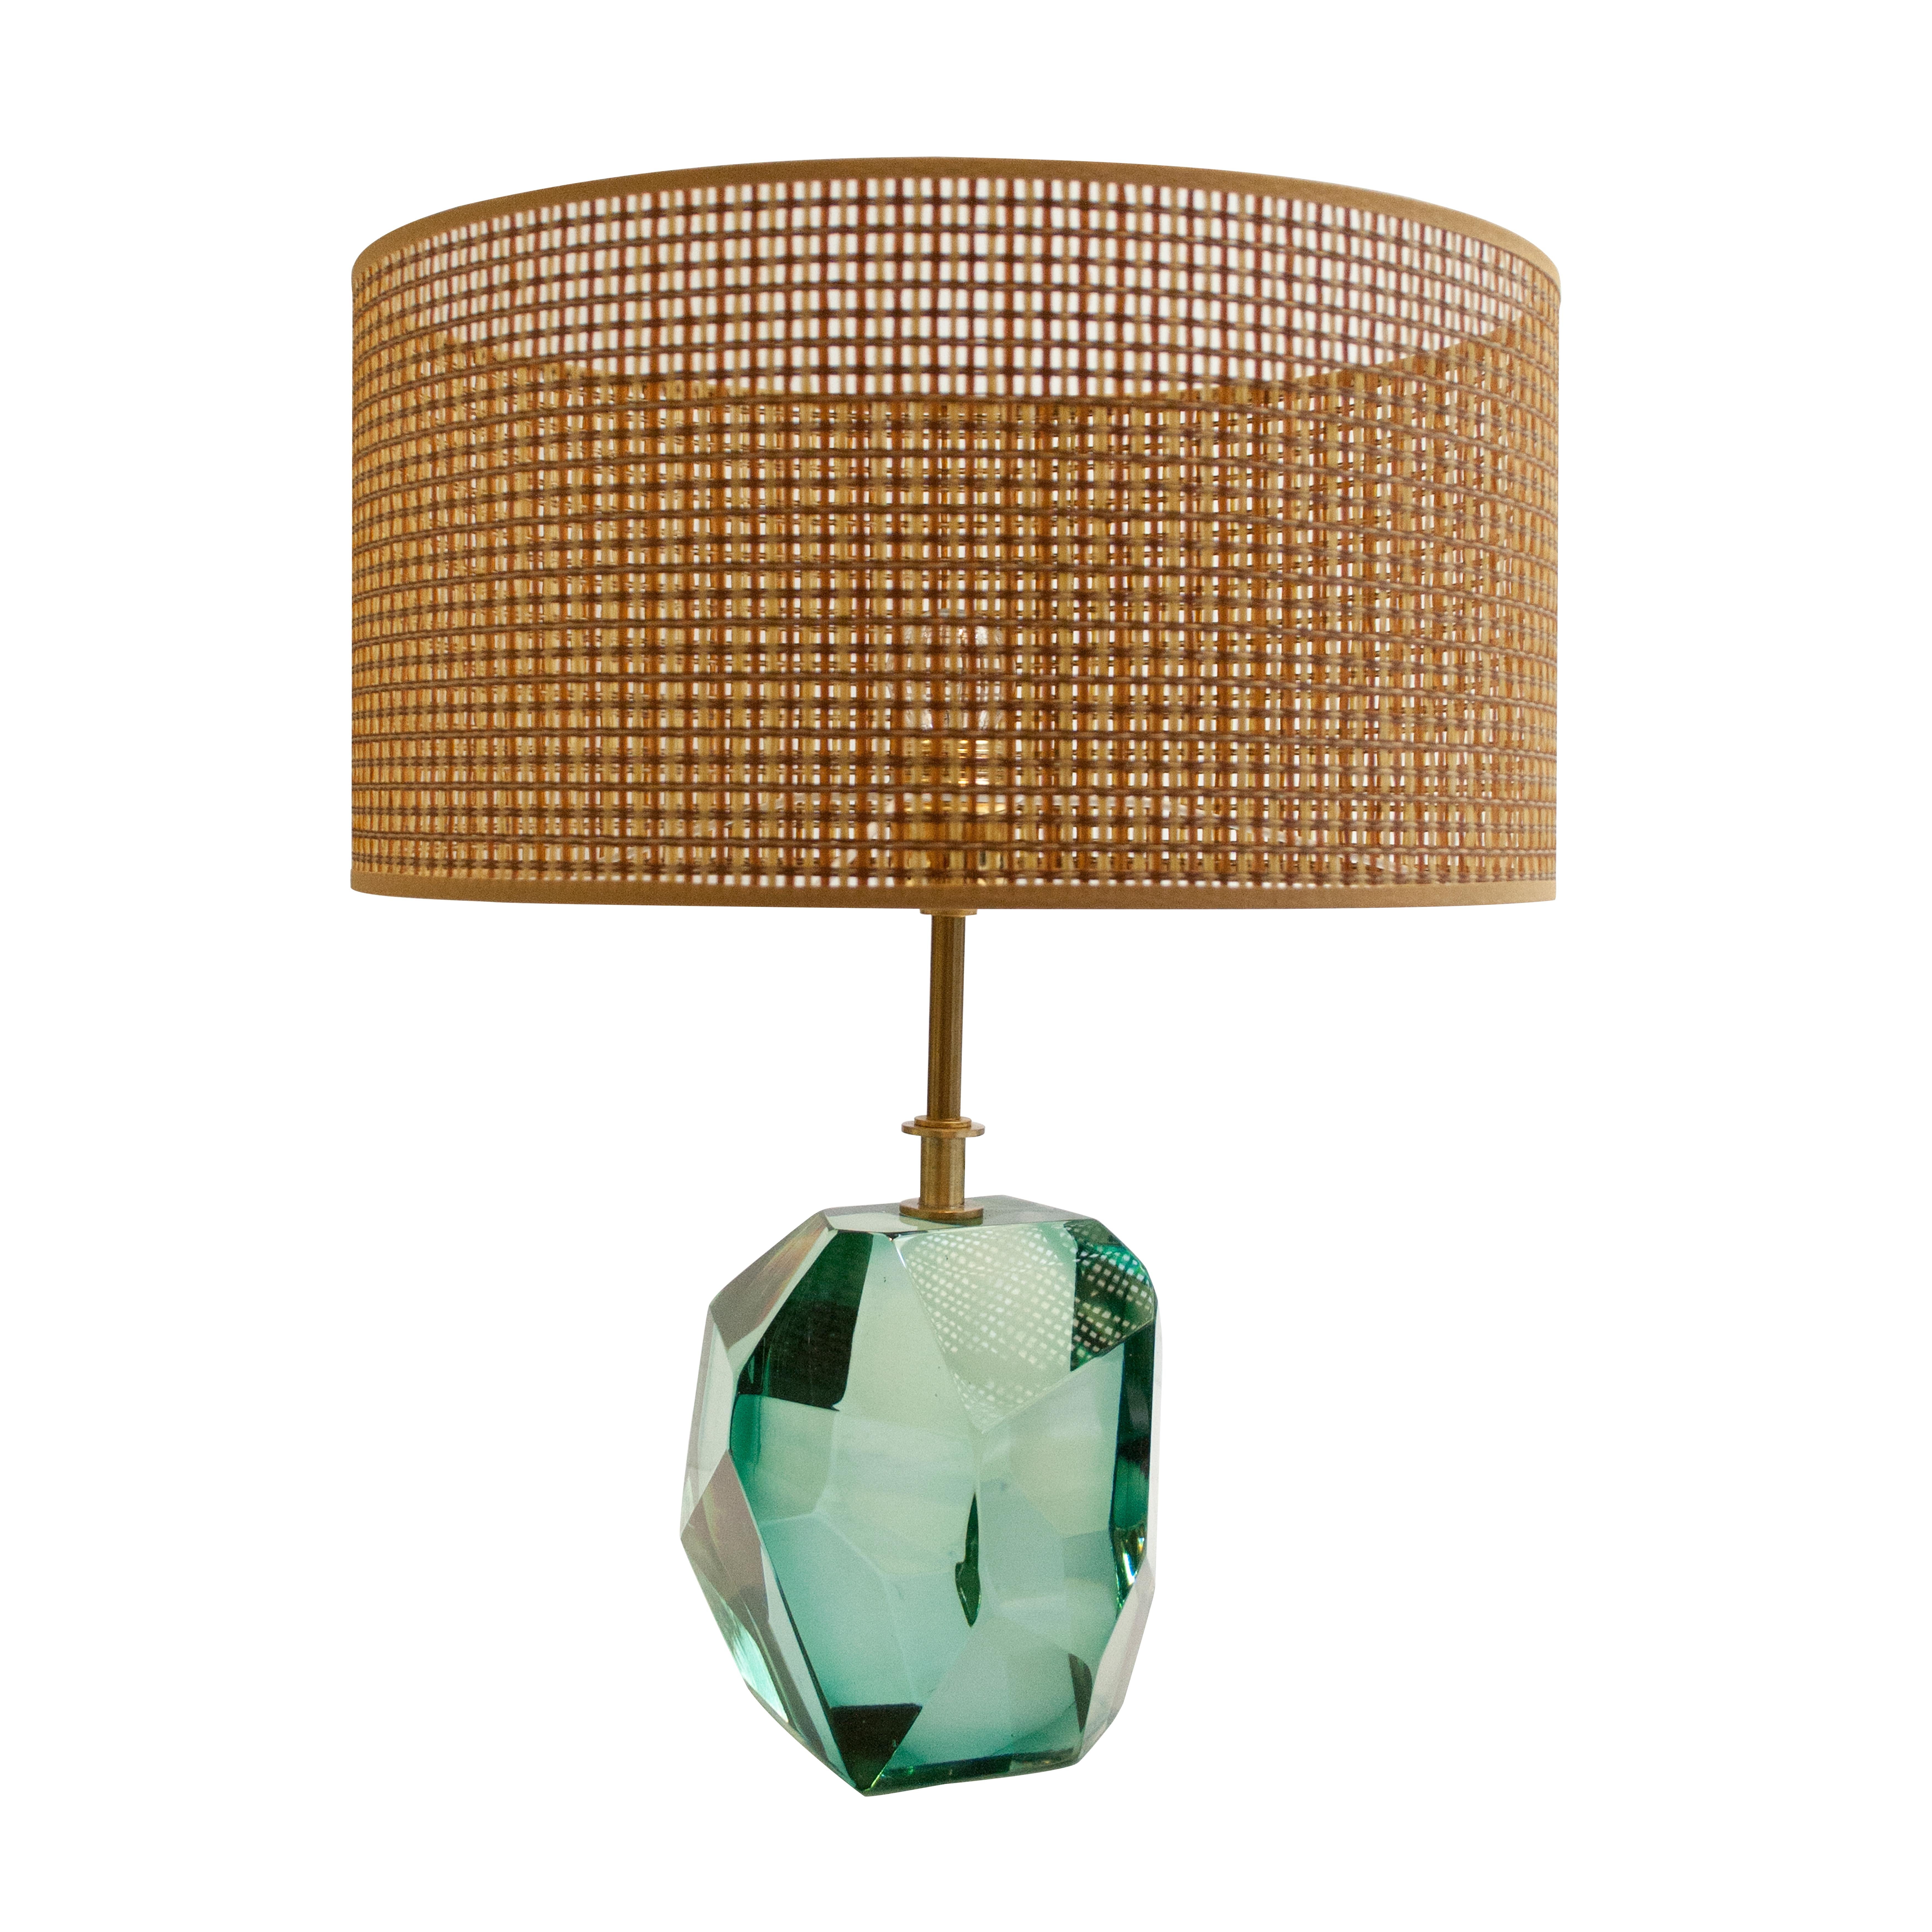 Pair of handmade table lamps made of Murano faceted glass in translucent turquoise with brass stem. Handmade lamp shade in natural fiber.